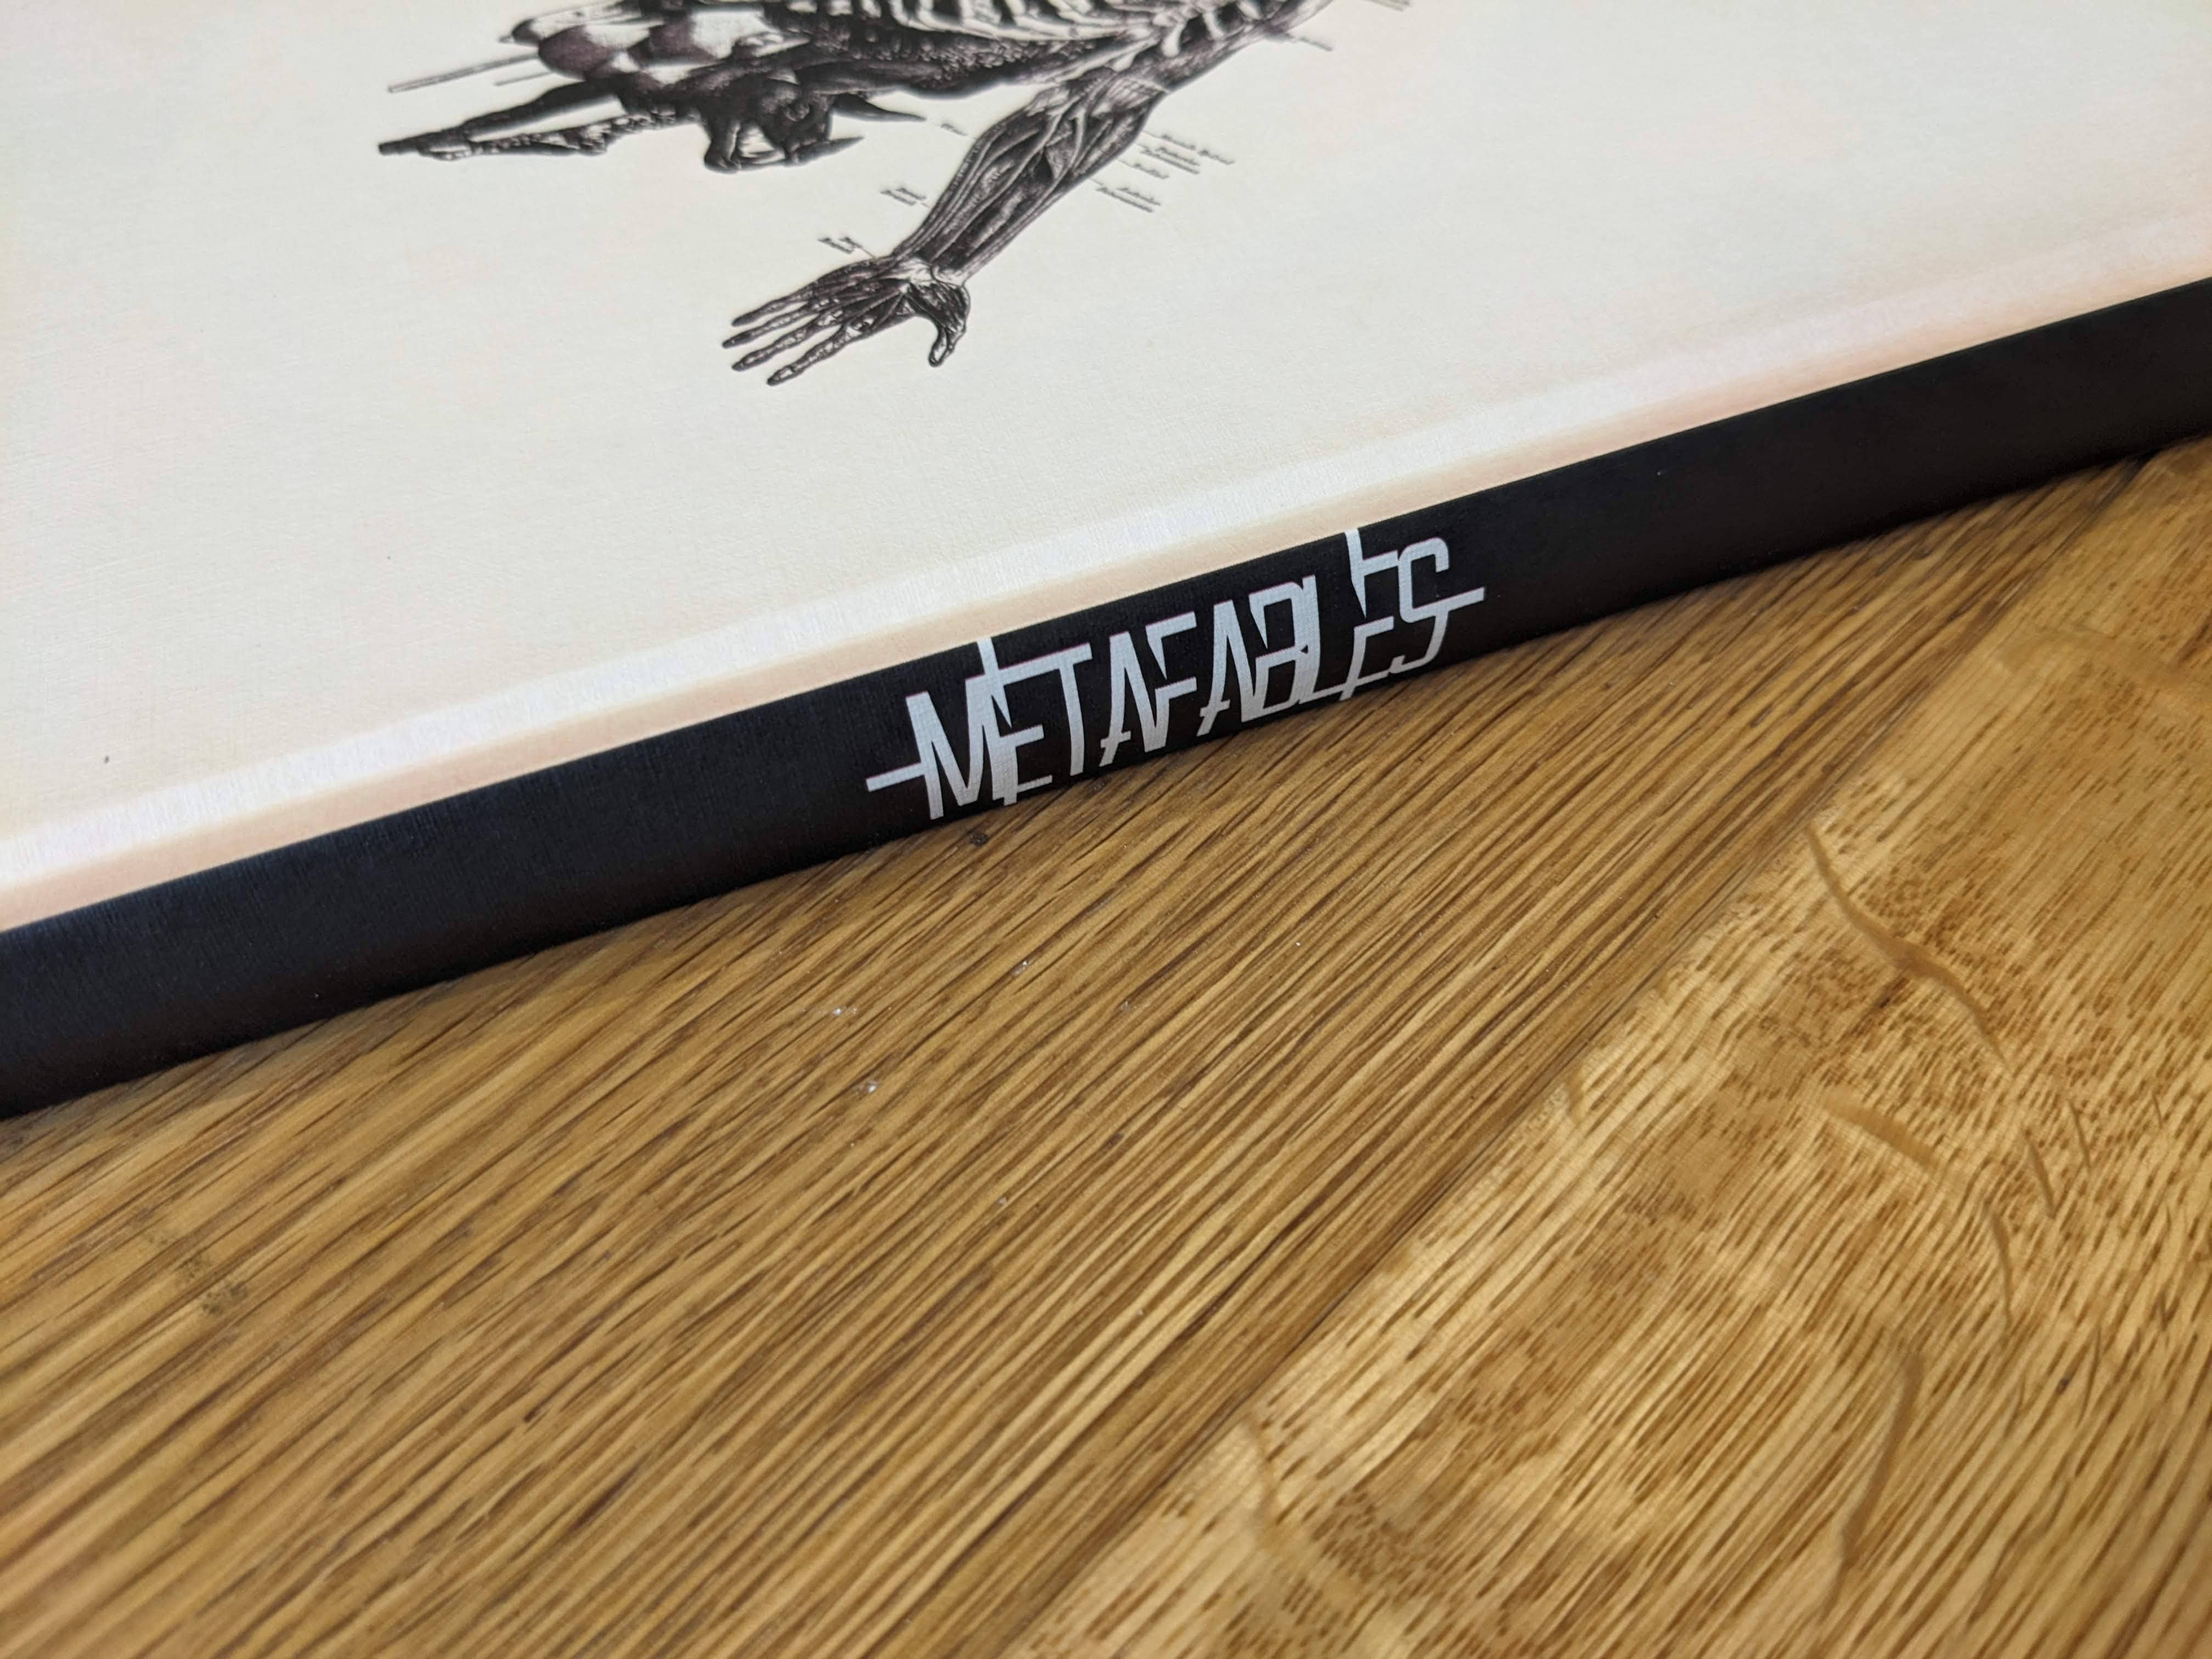 METAFABLES : The Art of Andrew Blucha